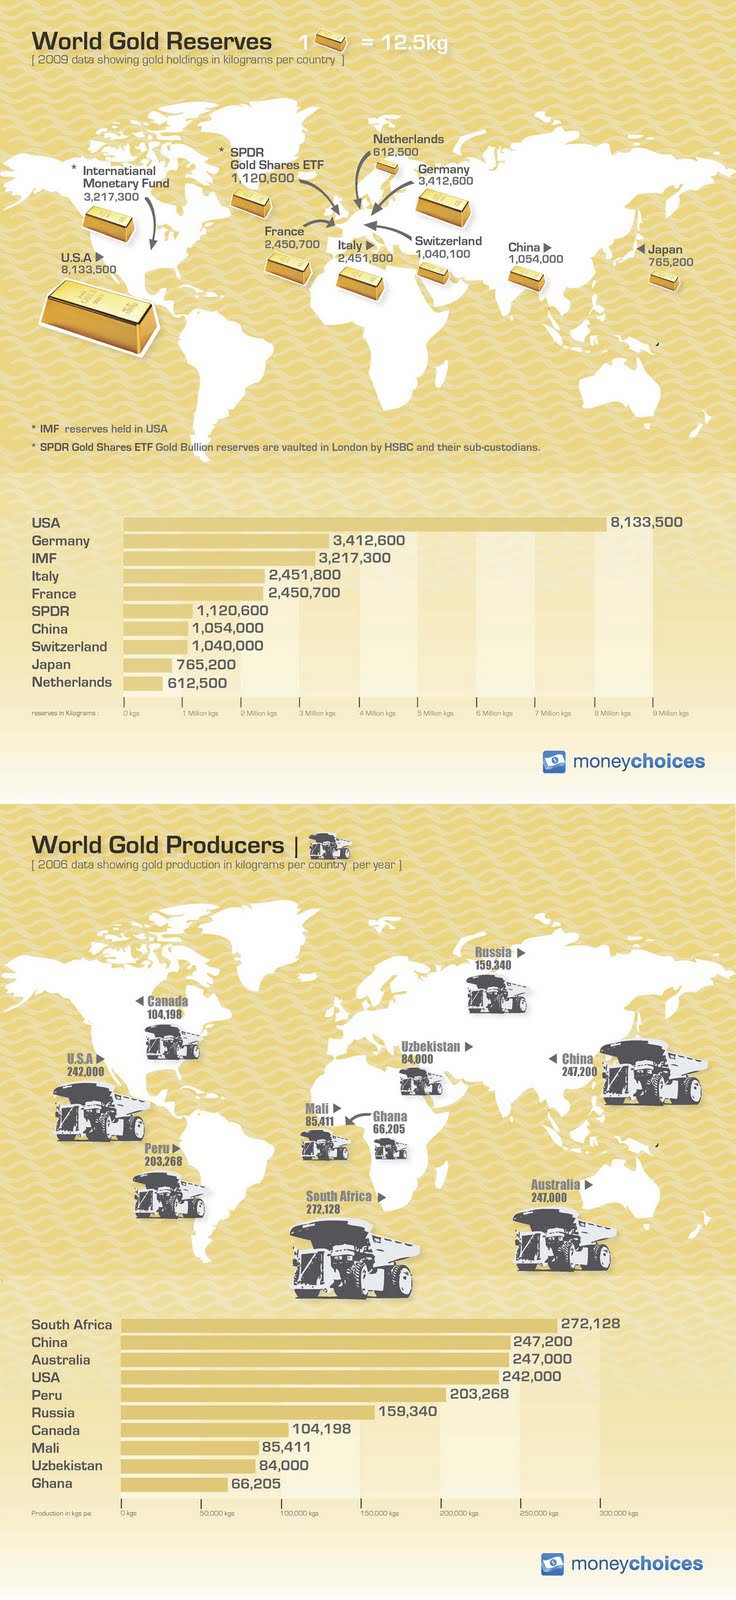 World gold reserves in kilograms per country per year [2006]